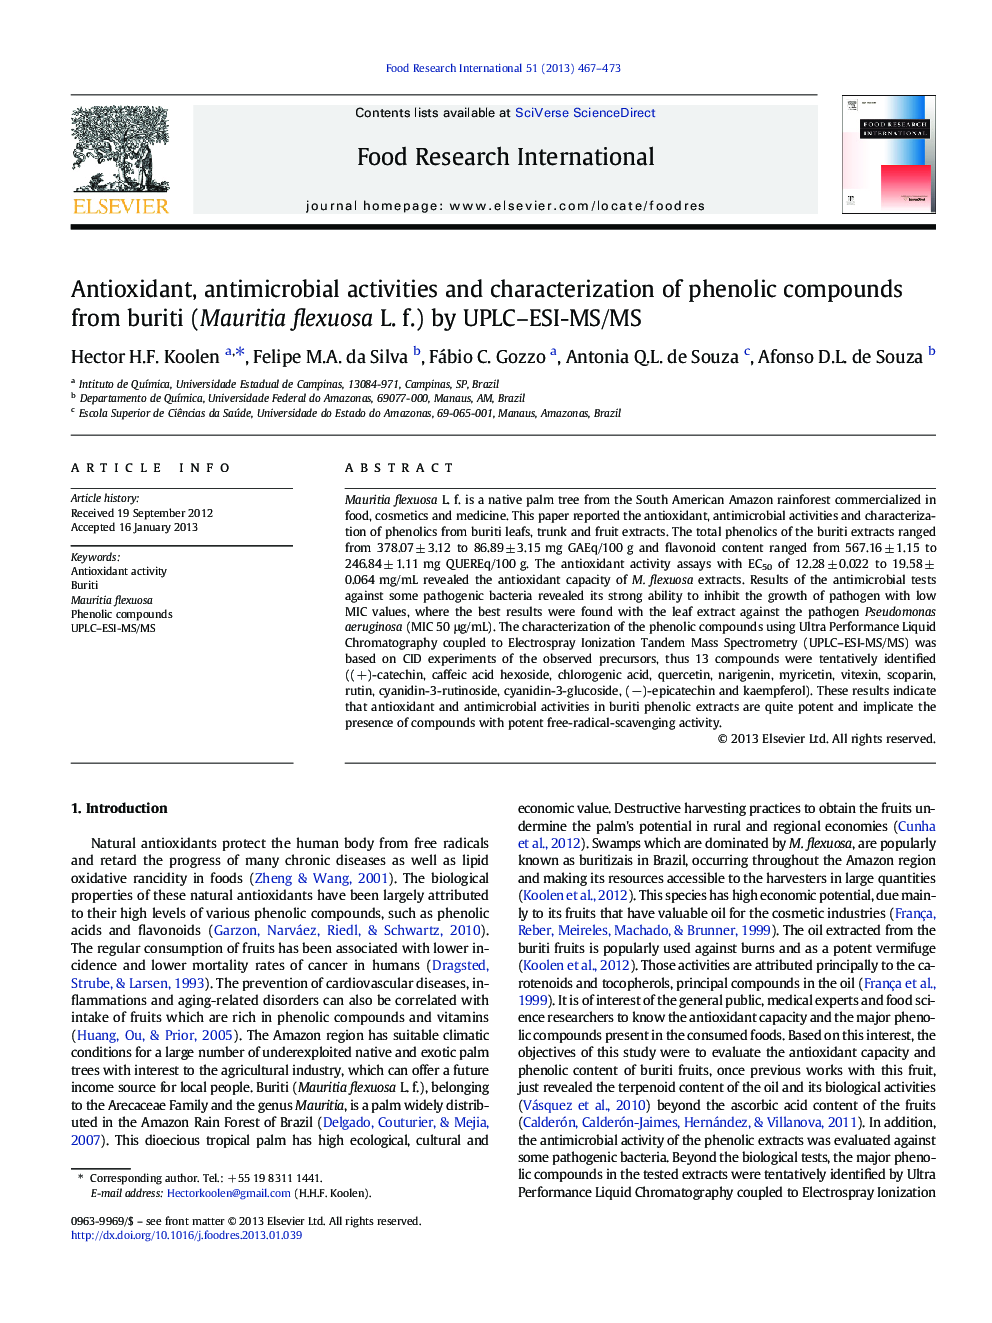 Antioxidant, antimicrobial activities and characterization of phenolic compounds from buriti (Mauritia flexuosa L. f.) by UPLC-ESI-MS/MS